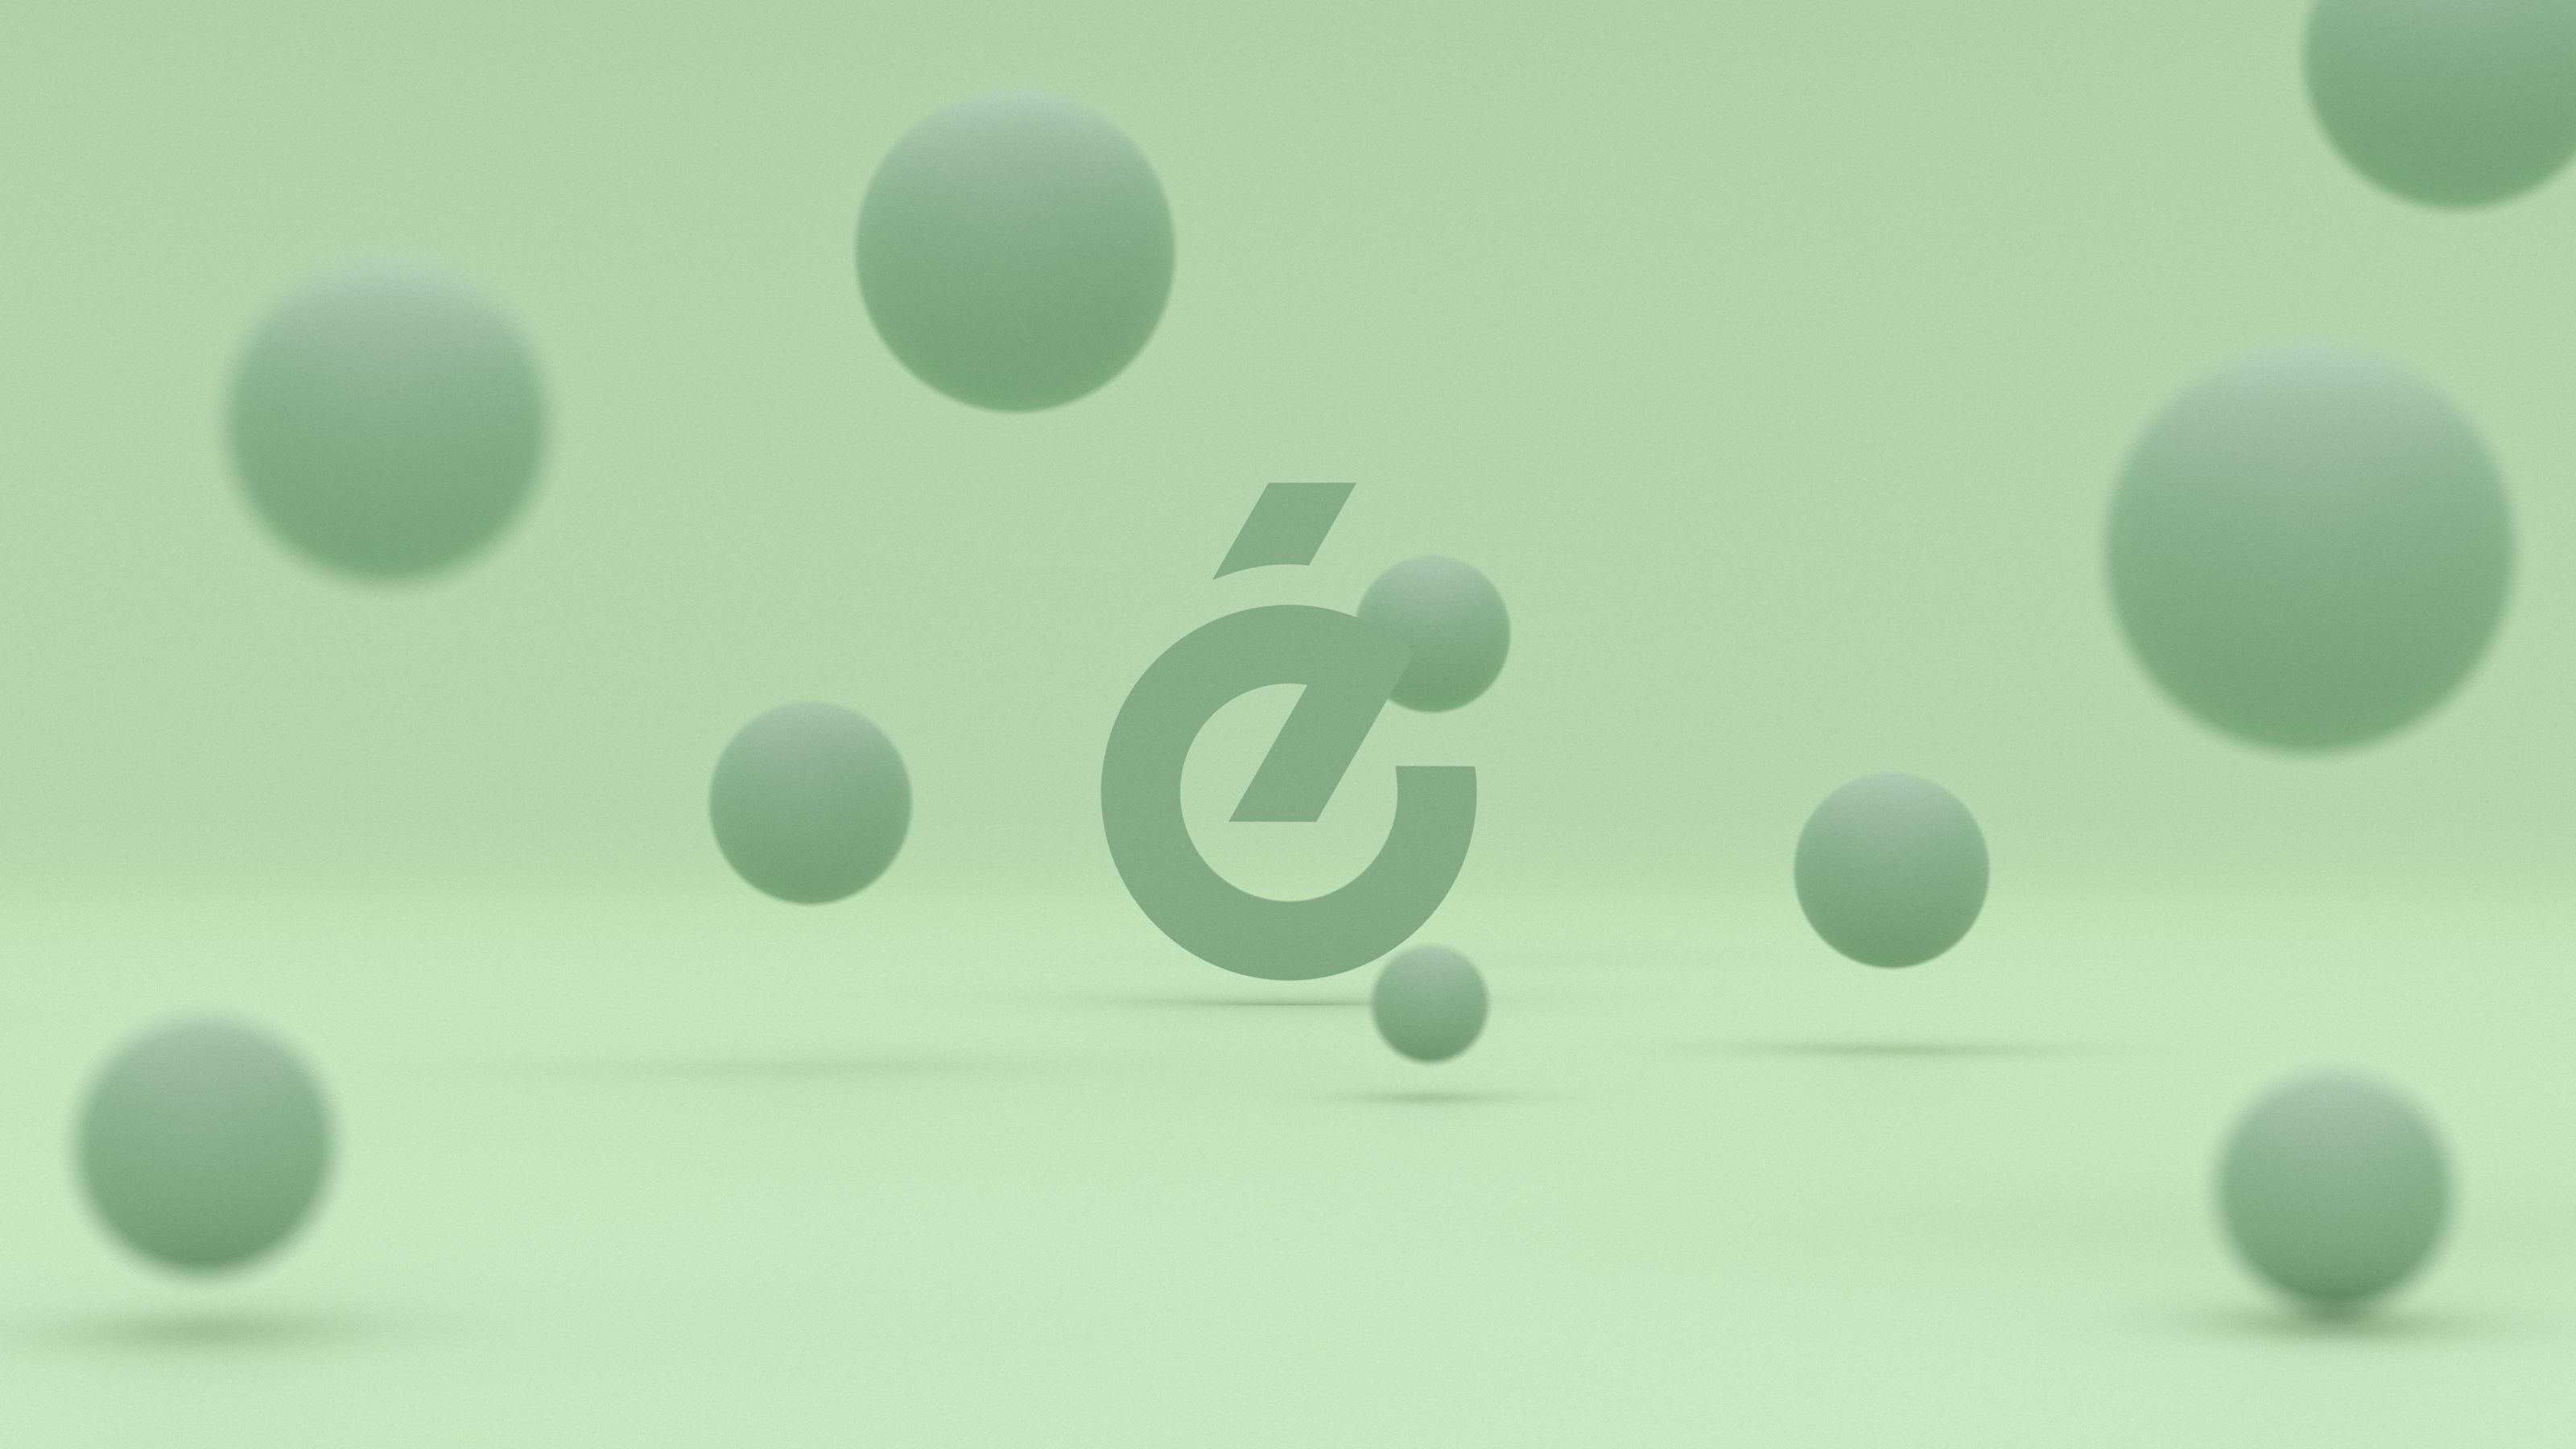 evensix logo surrounded by spheres